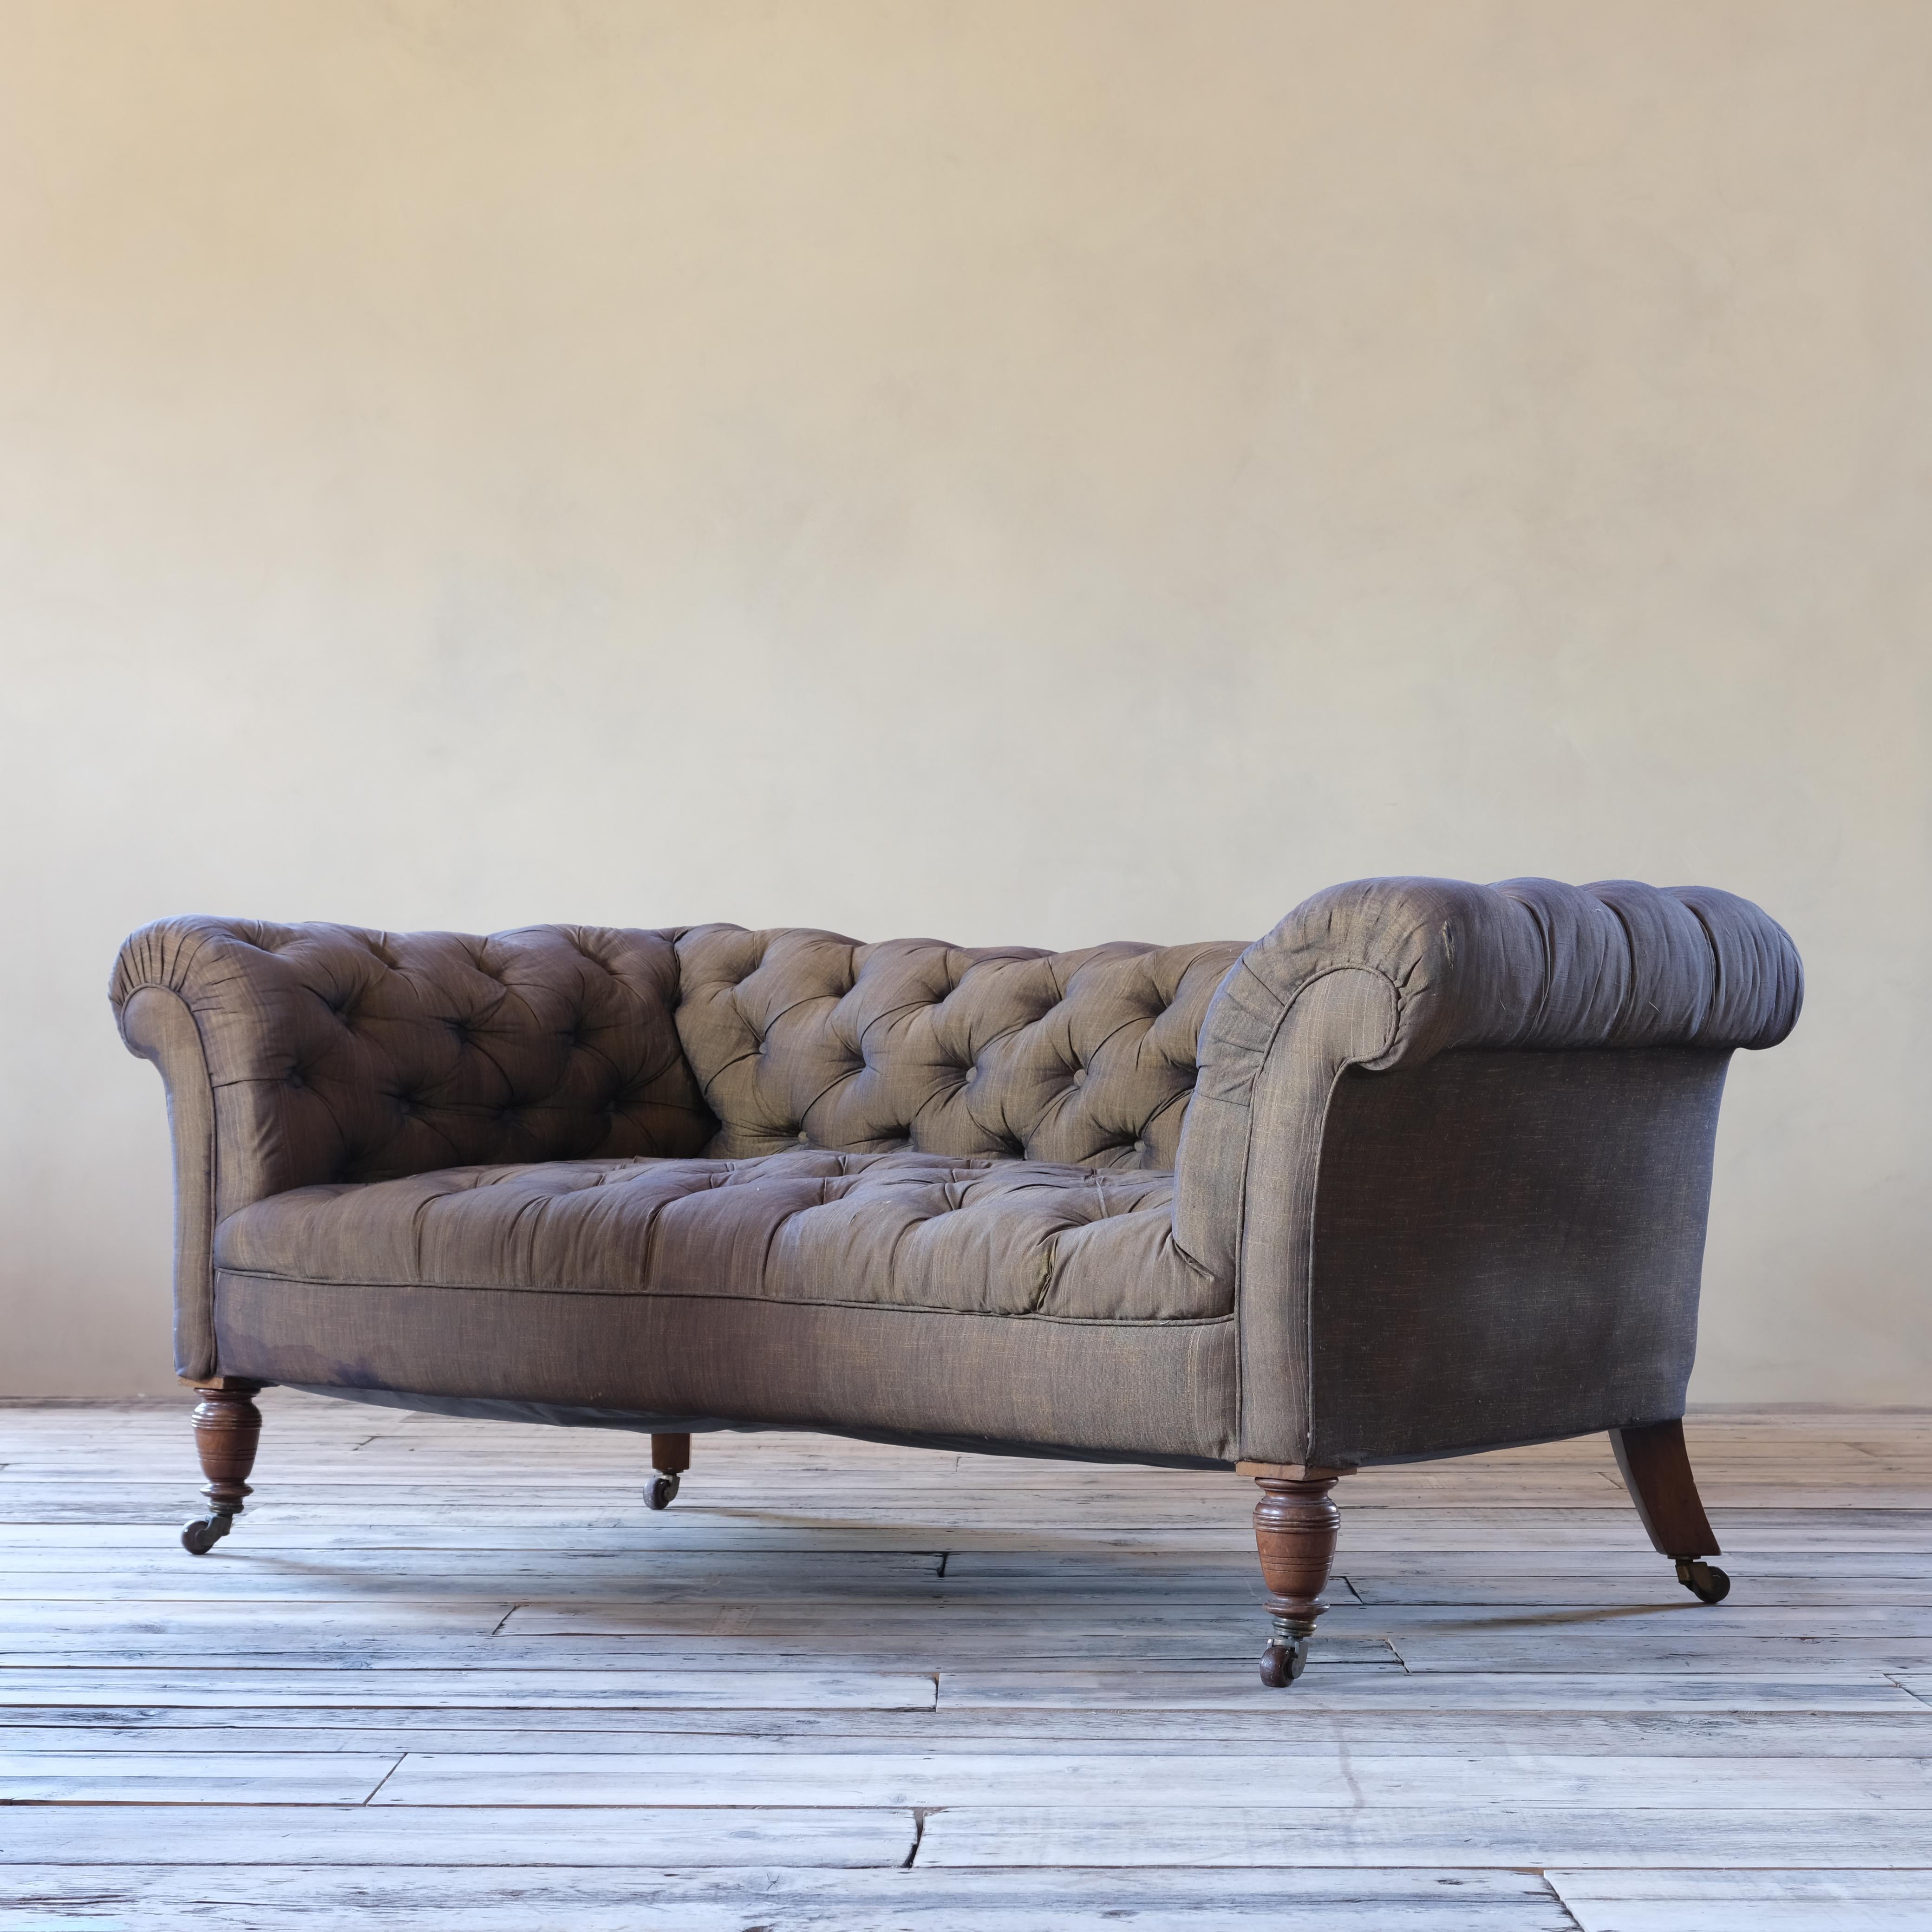 A good quality 19th century compact chesterfield sofa by Hampton & sons of Pall Mall - London. Raised on Walnut legs and the original stamped brass and ceramic casters. 

In good solid order and just requiring upholstery. 

For upholstery

As